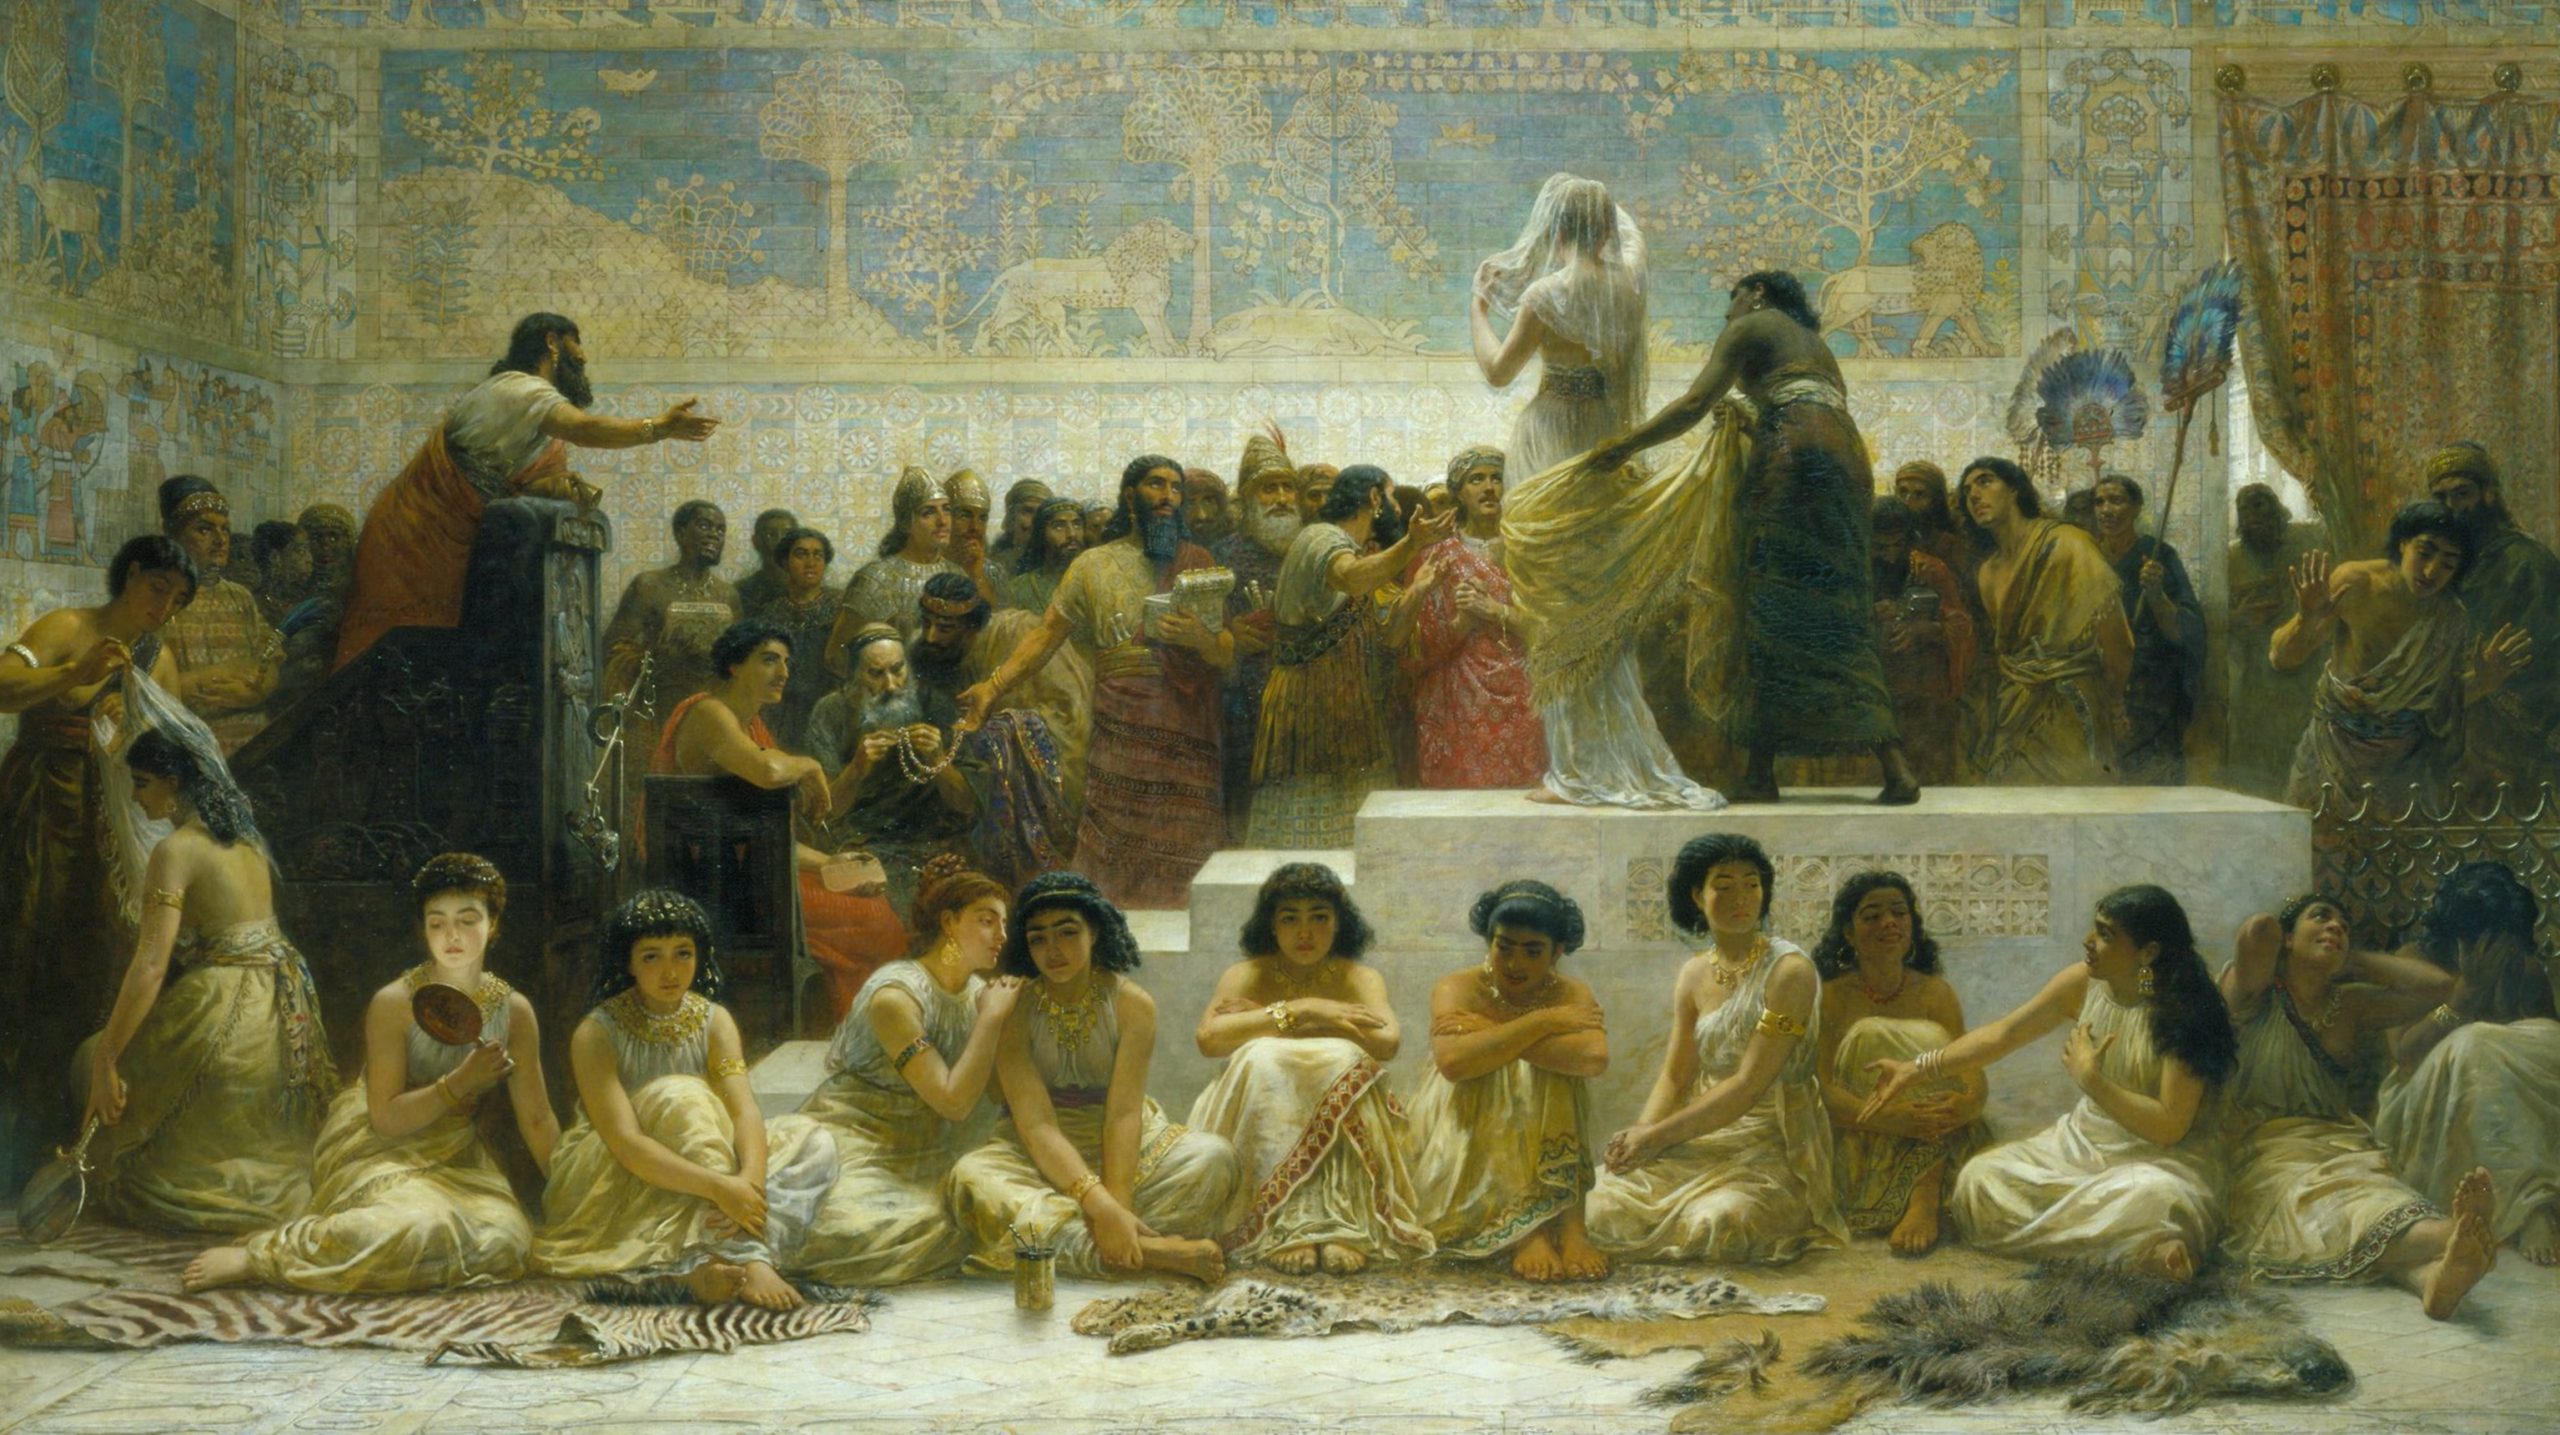 Mesopotamian Women and Their Social Roles - History